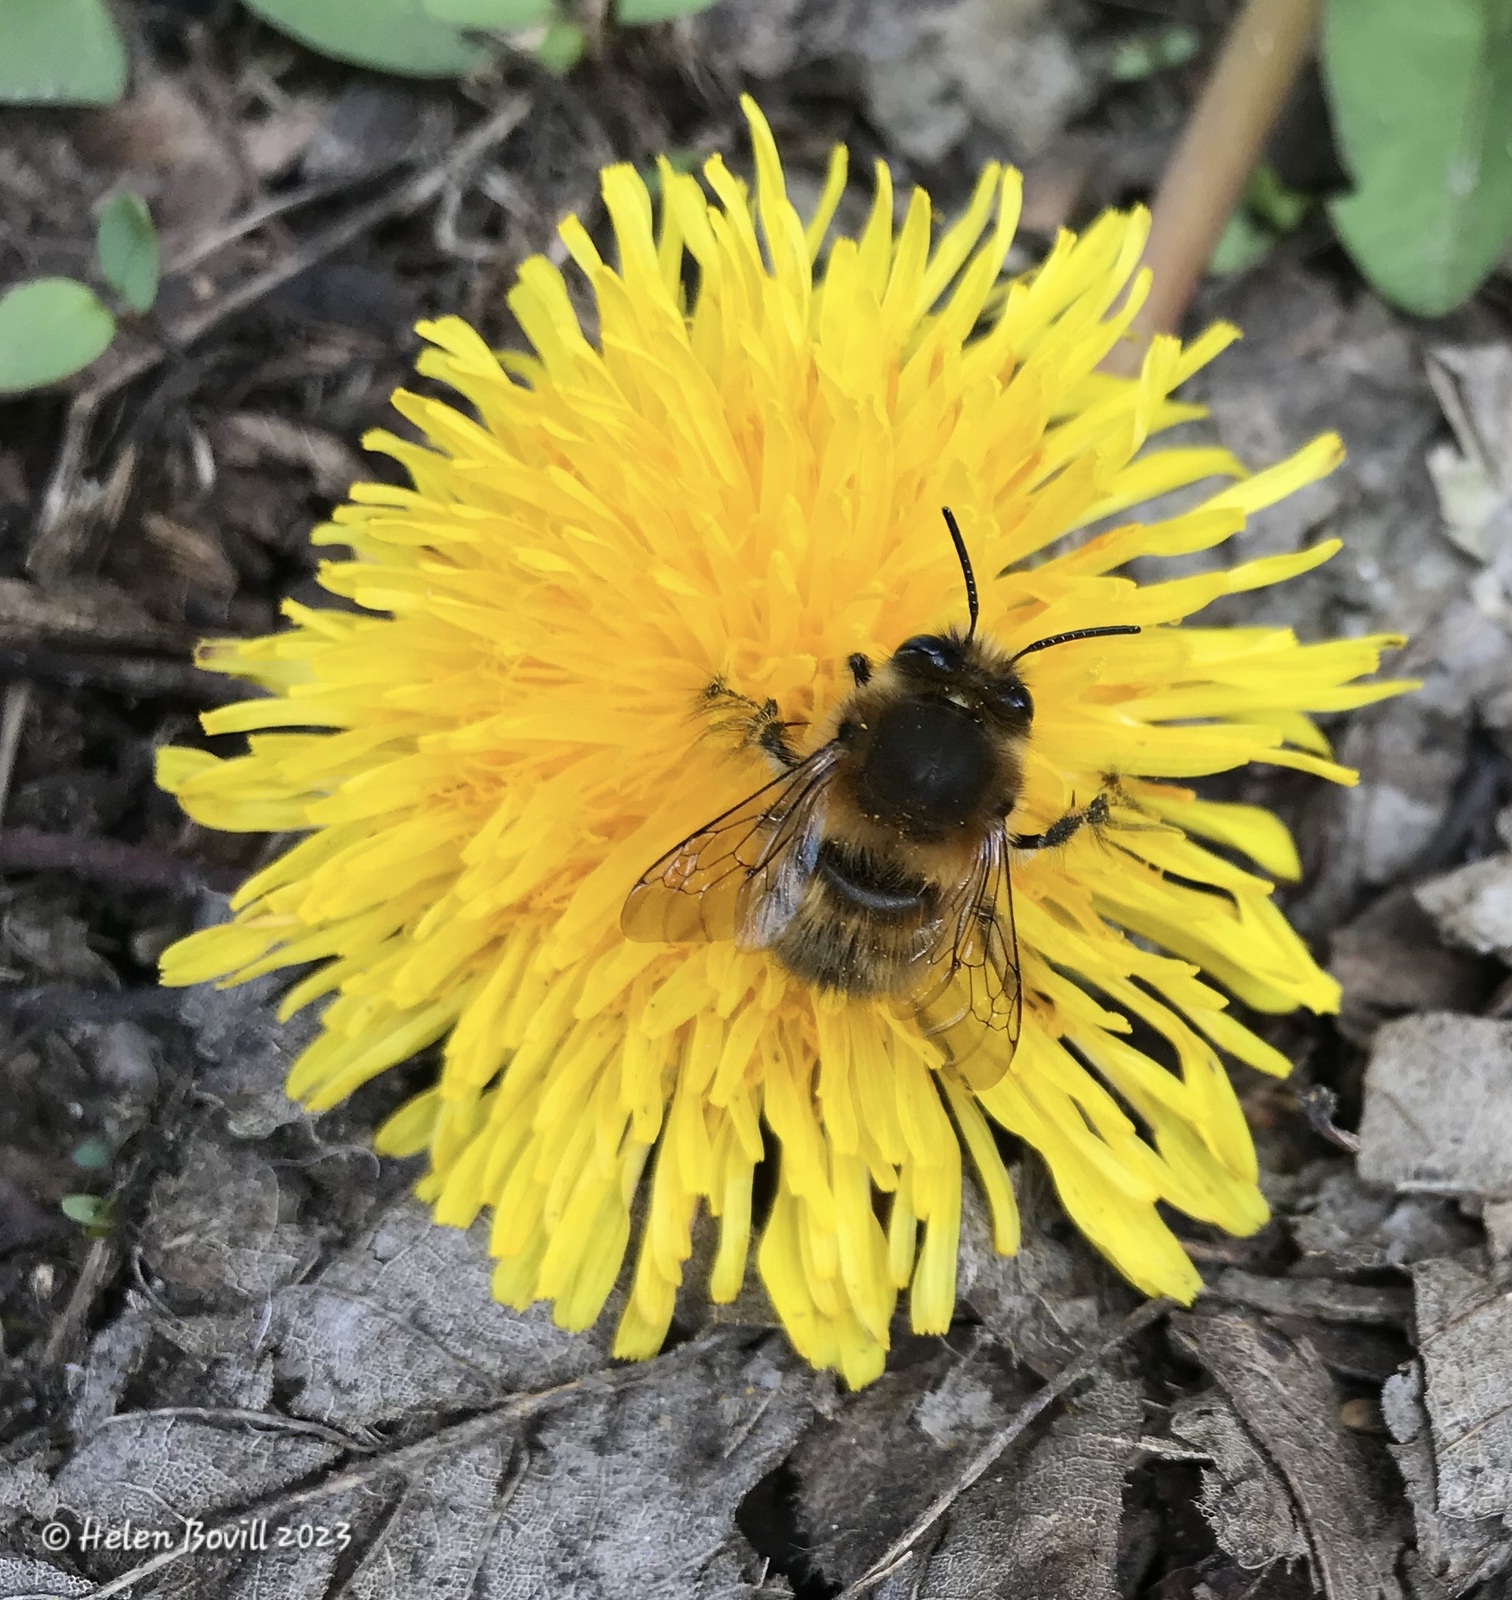 Hairy-footed Flower Bee on a Dandelion